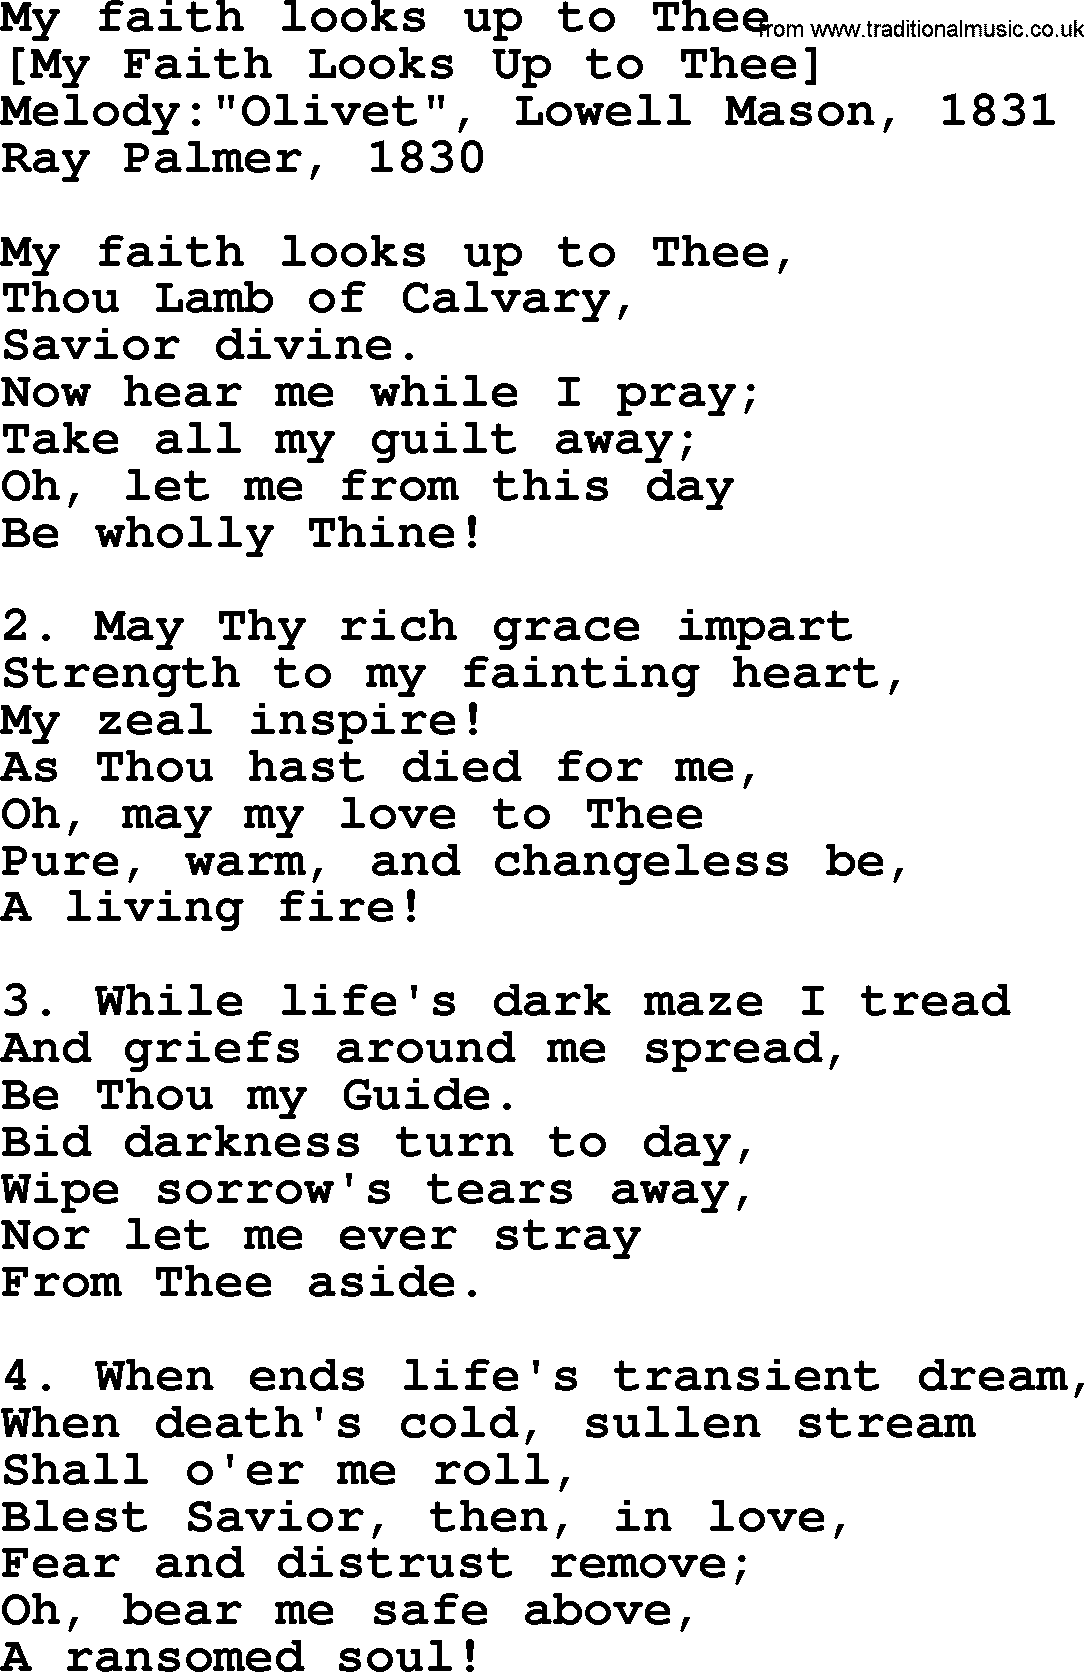 Old American Song: My Faith Looks Up To Thee, lyrics